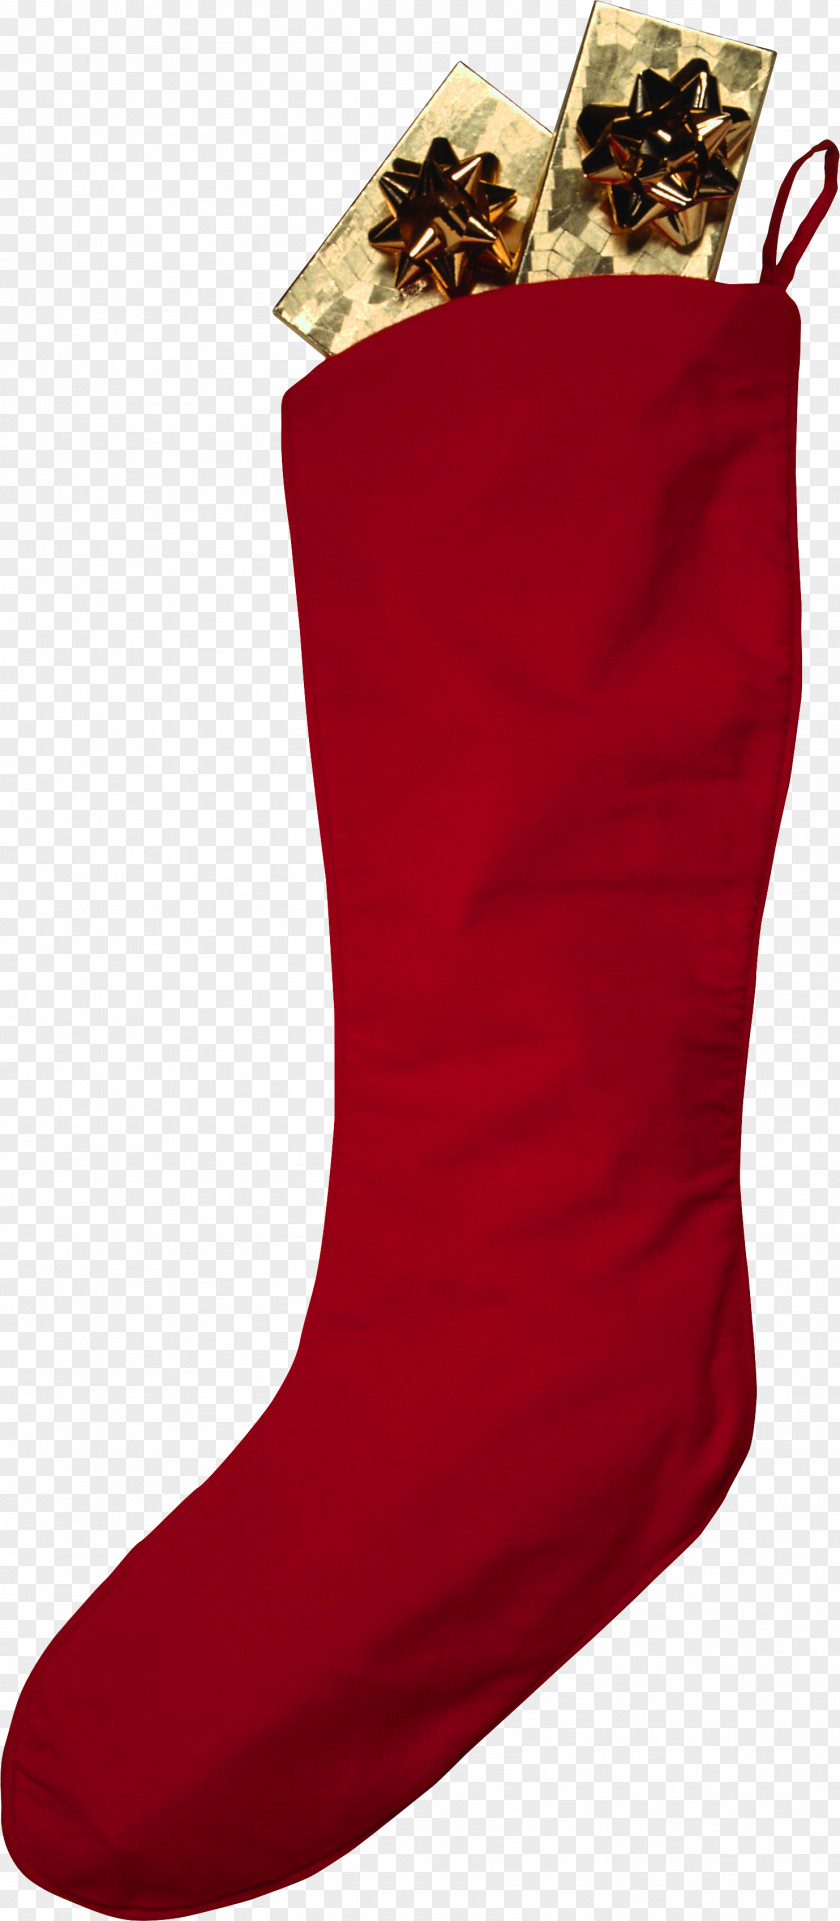 Boot Christmas Stockings Gift Decoration PNG